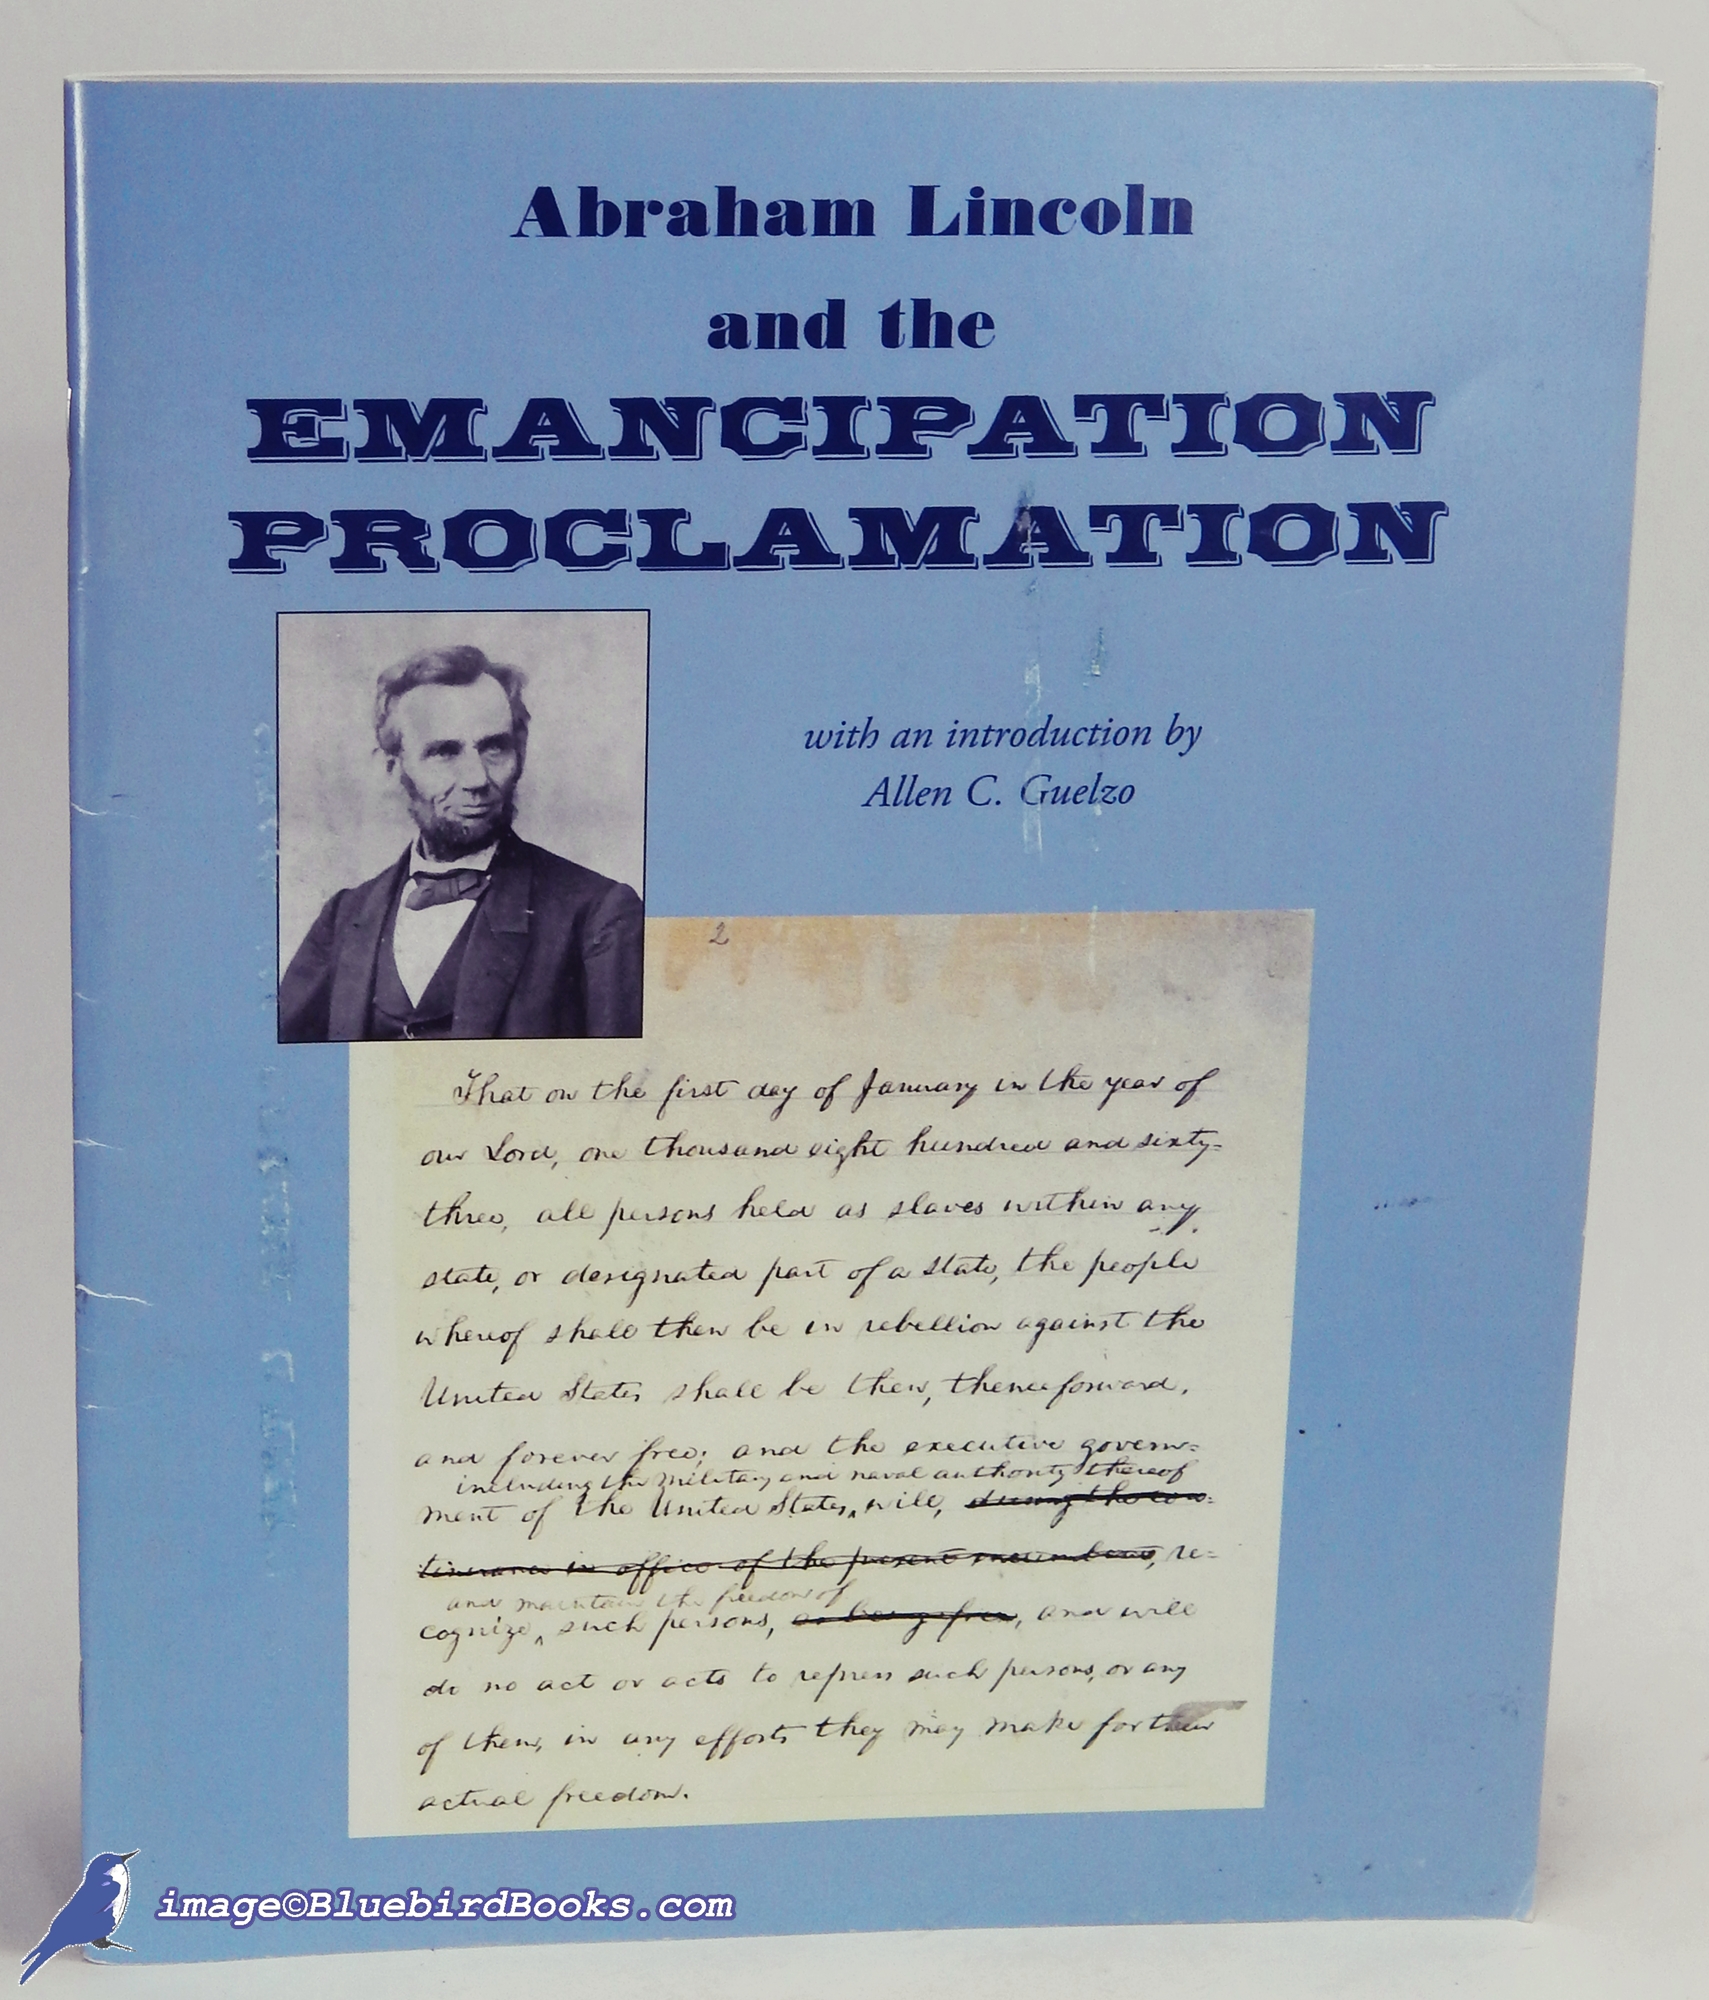 BASKER, JAMES G.; AHLSTROM, JUSTINE (COMPILERS) - Abraham Lincoln and the Emancipation Proclamation: A Selection of Documents for Teachers